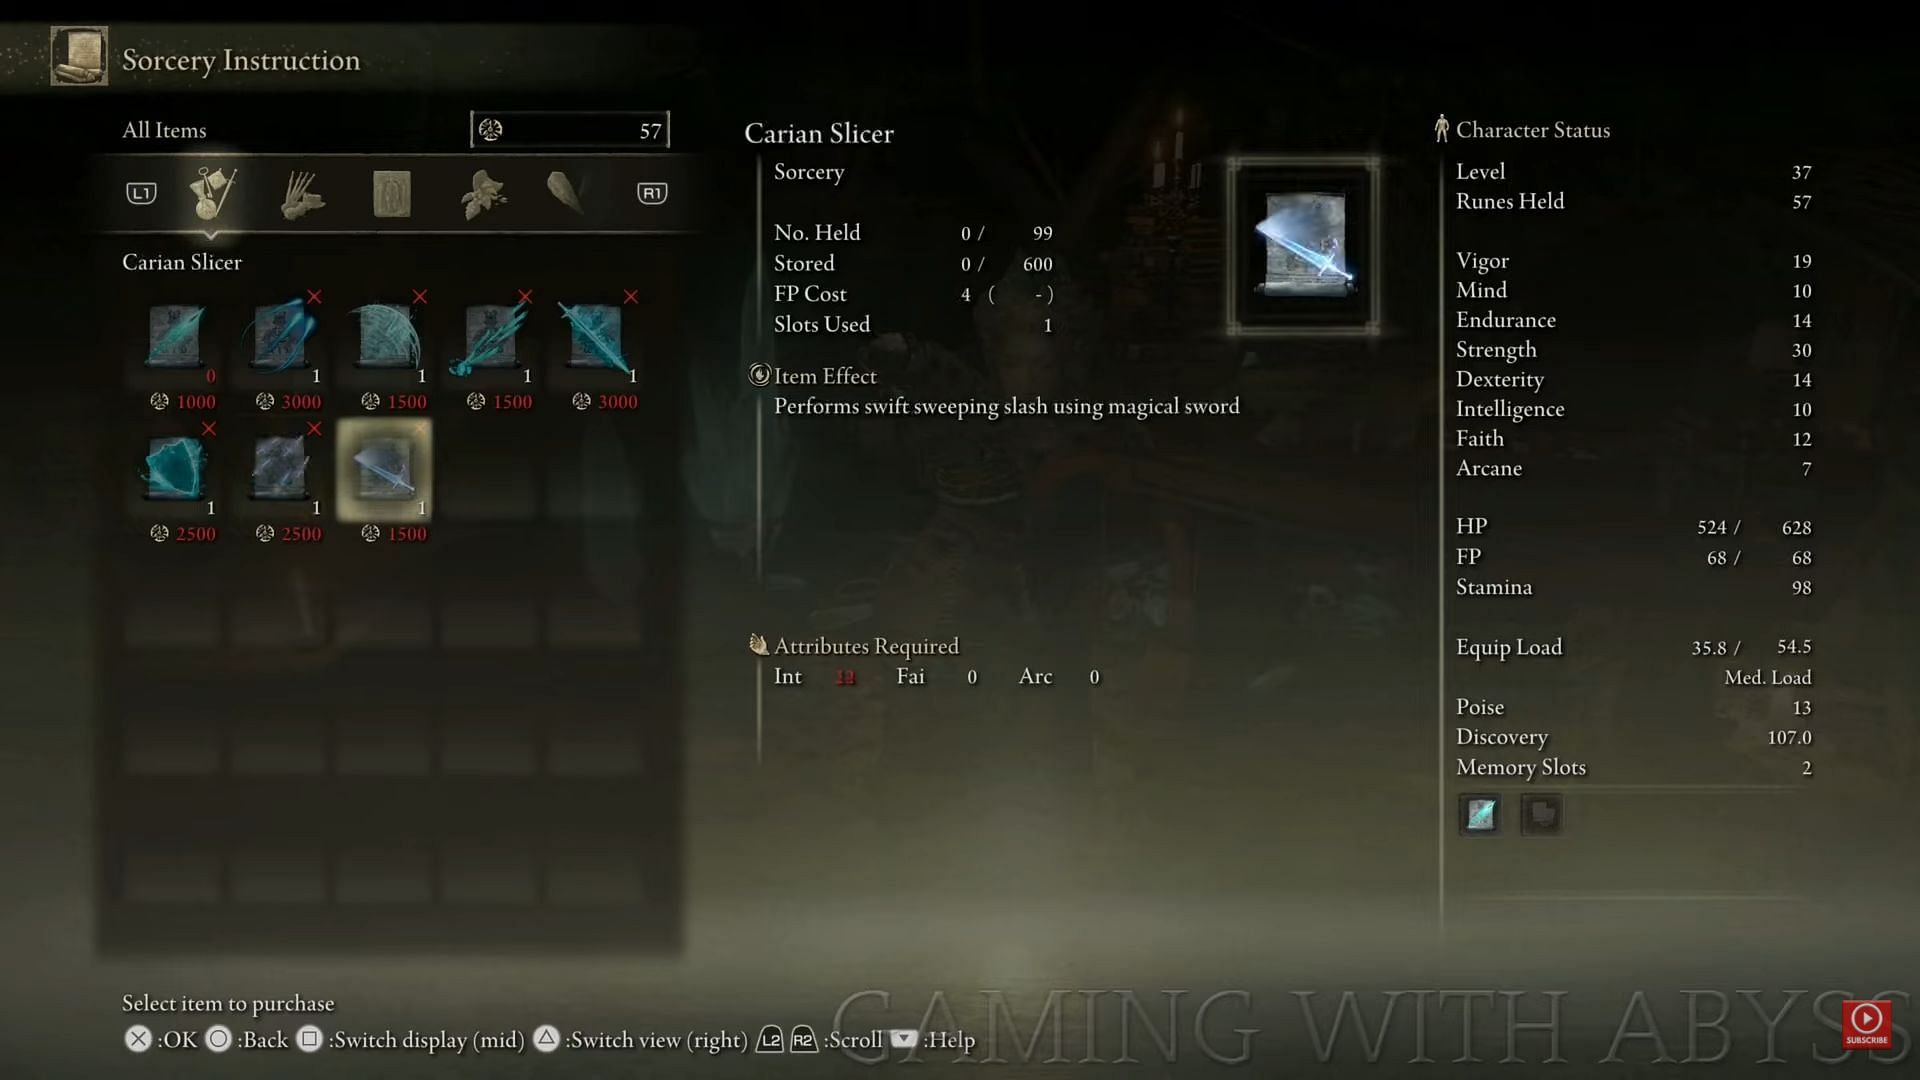 Carian Slicer is a great spell that does some really good damage to bosses (Image via Gaming with Abyss/Youtube)